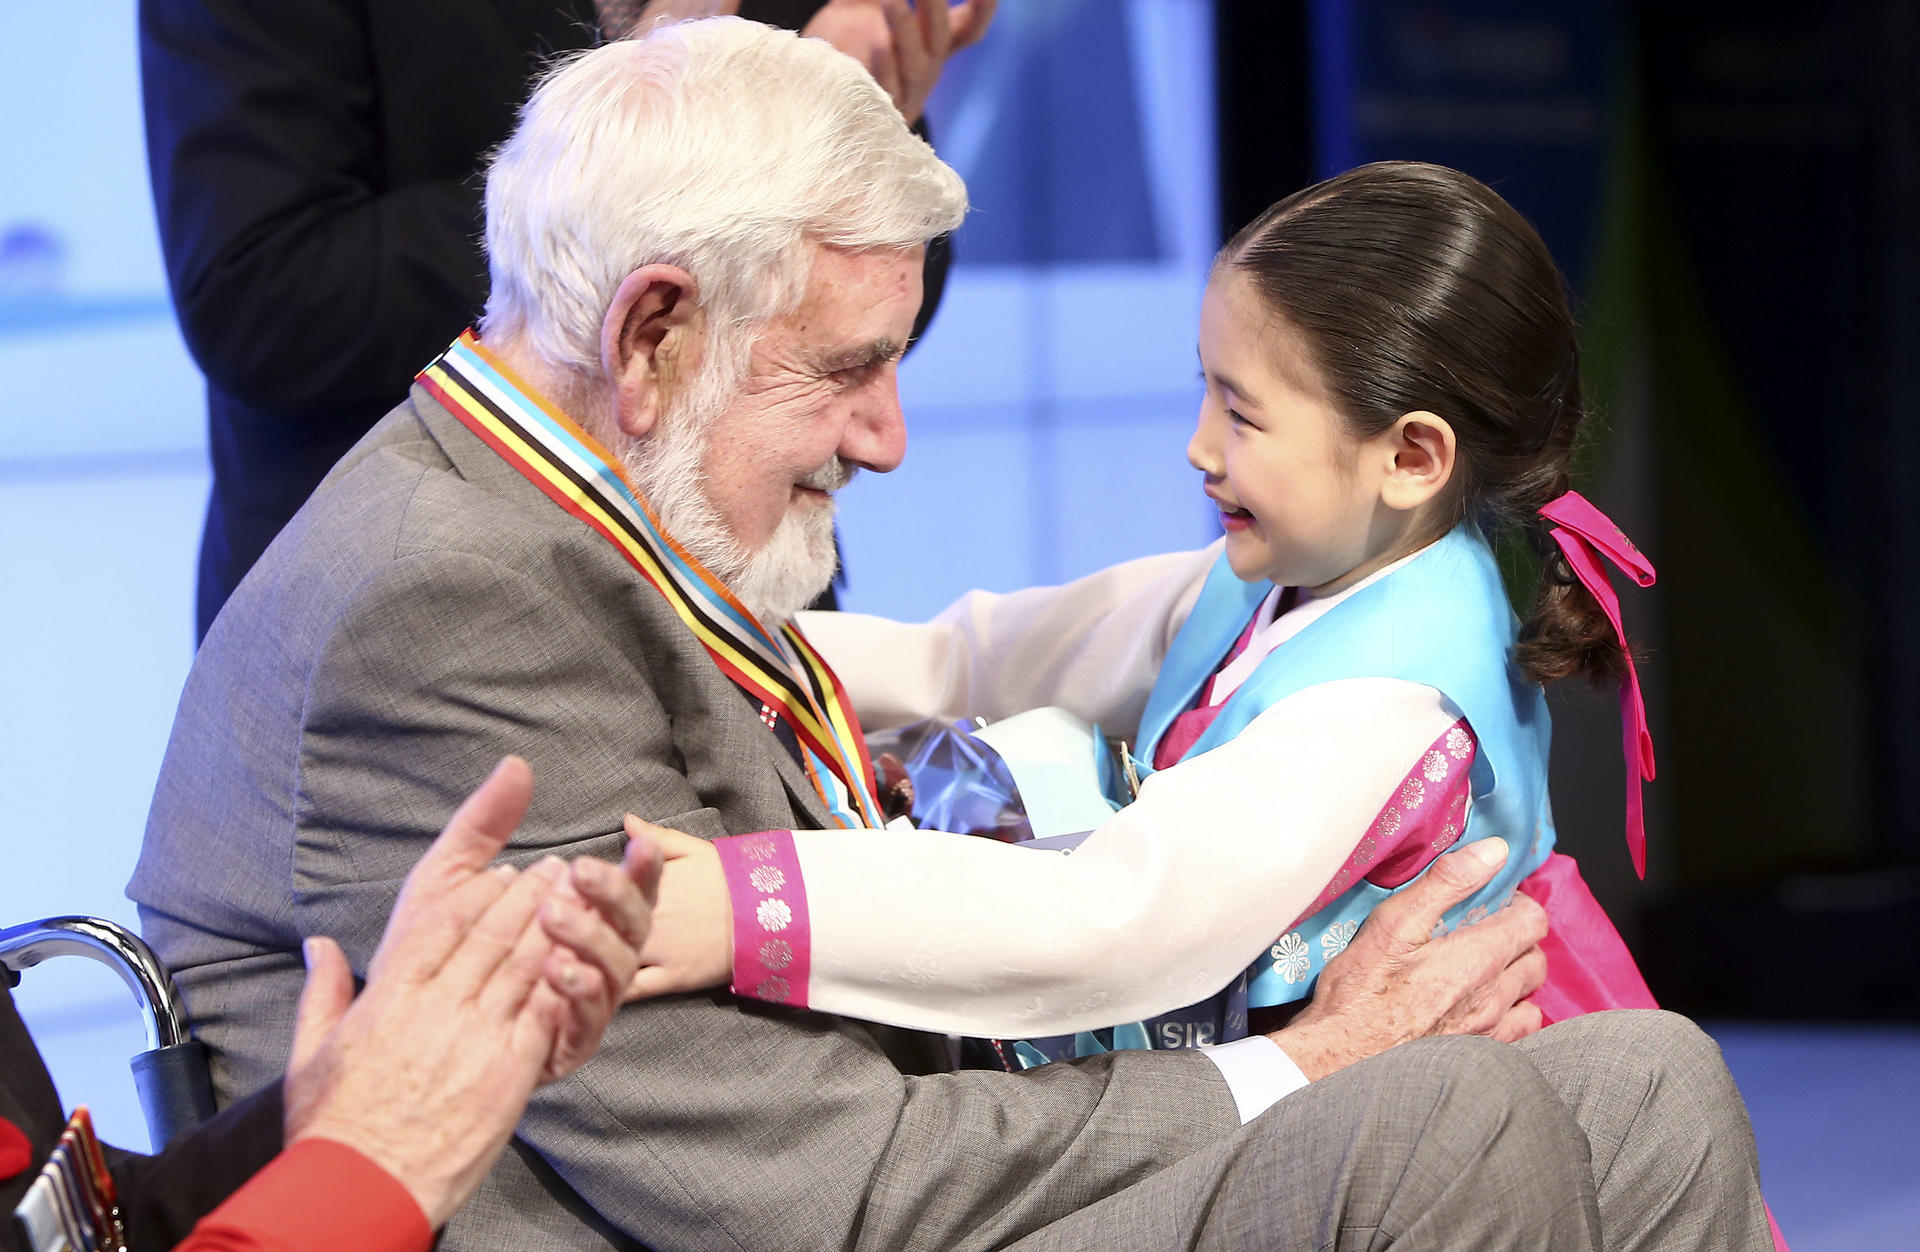 Korean War hero Bill Speakman, 87, is greeted by a young South Korean girl during the presentation ceremony for his medals. Speakman said the medal originated in South Korea, so it should be returned there. Photo: Lee Dong-geun